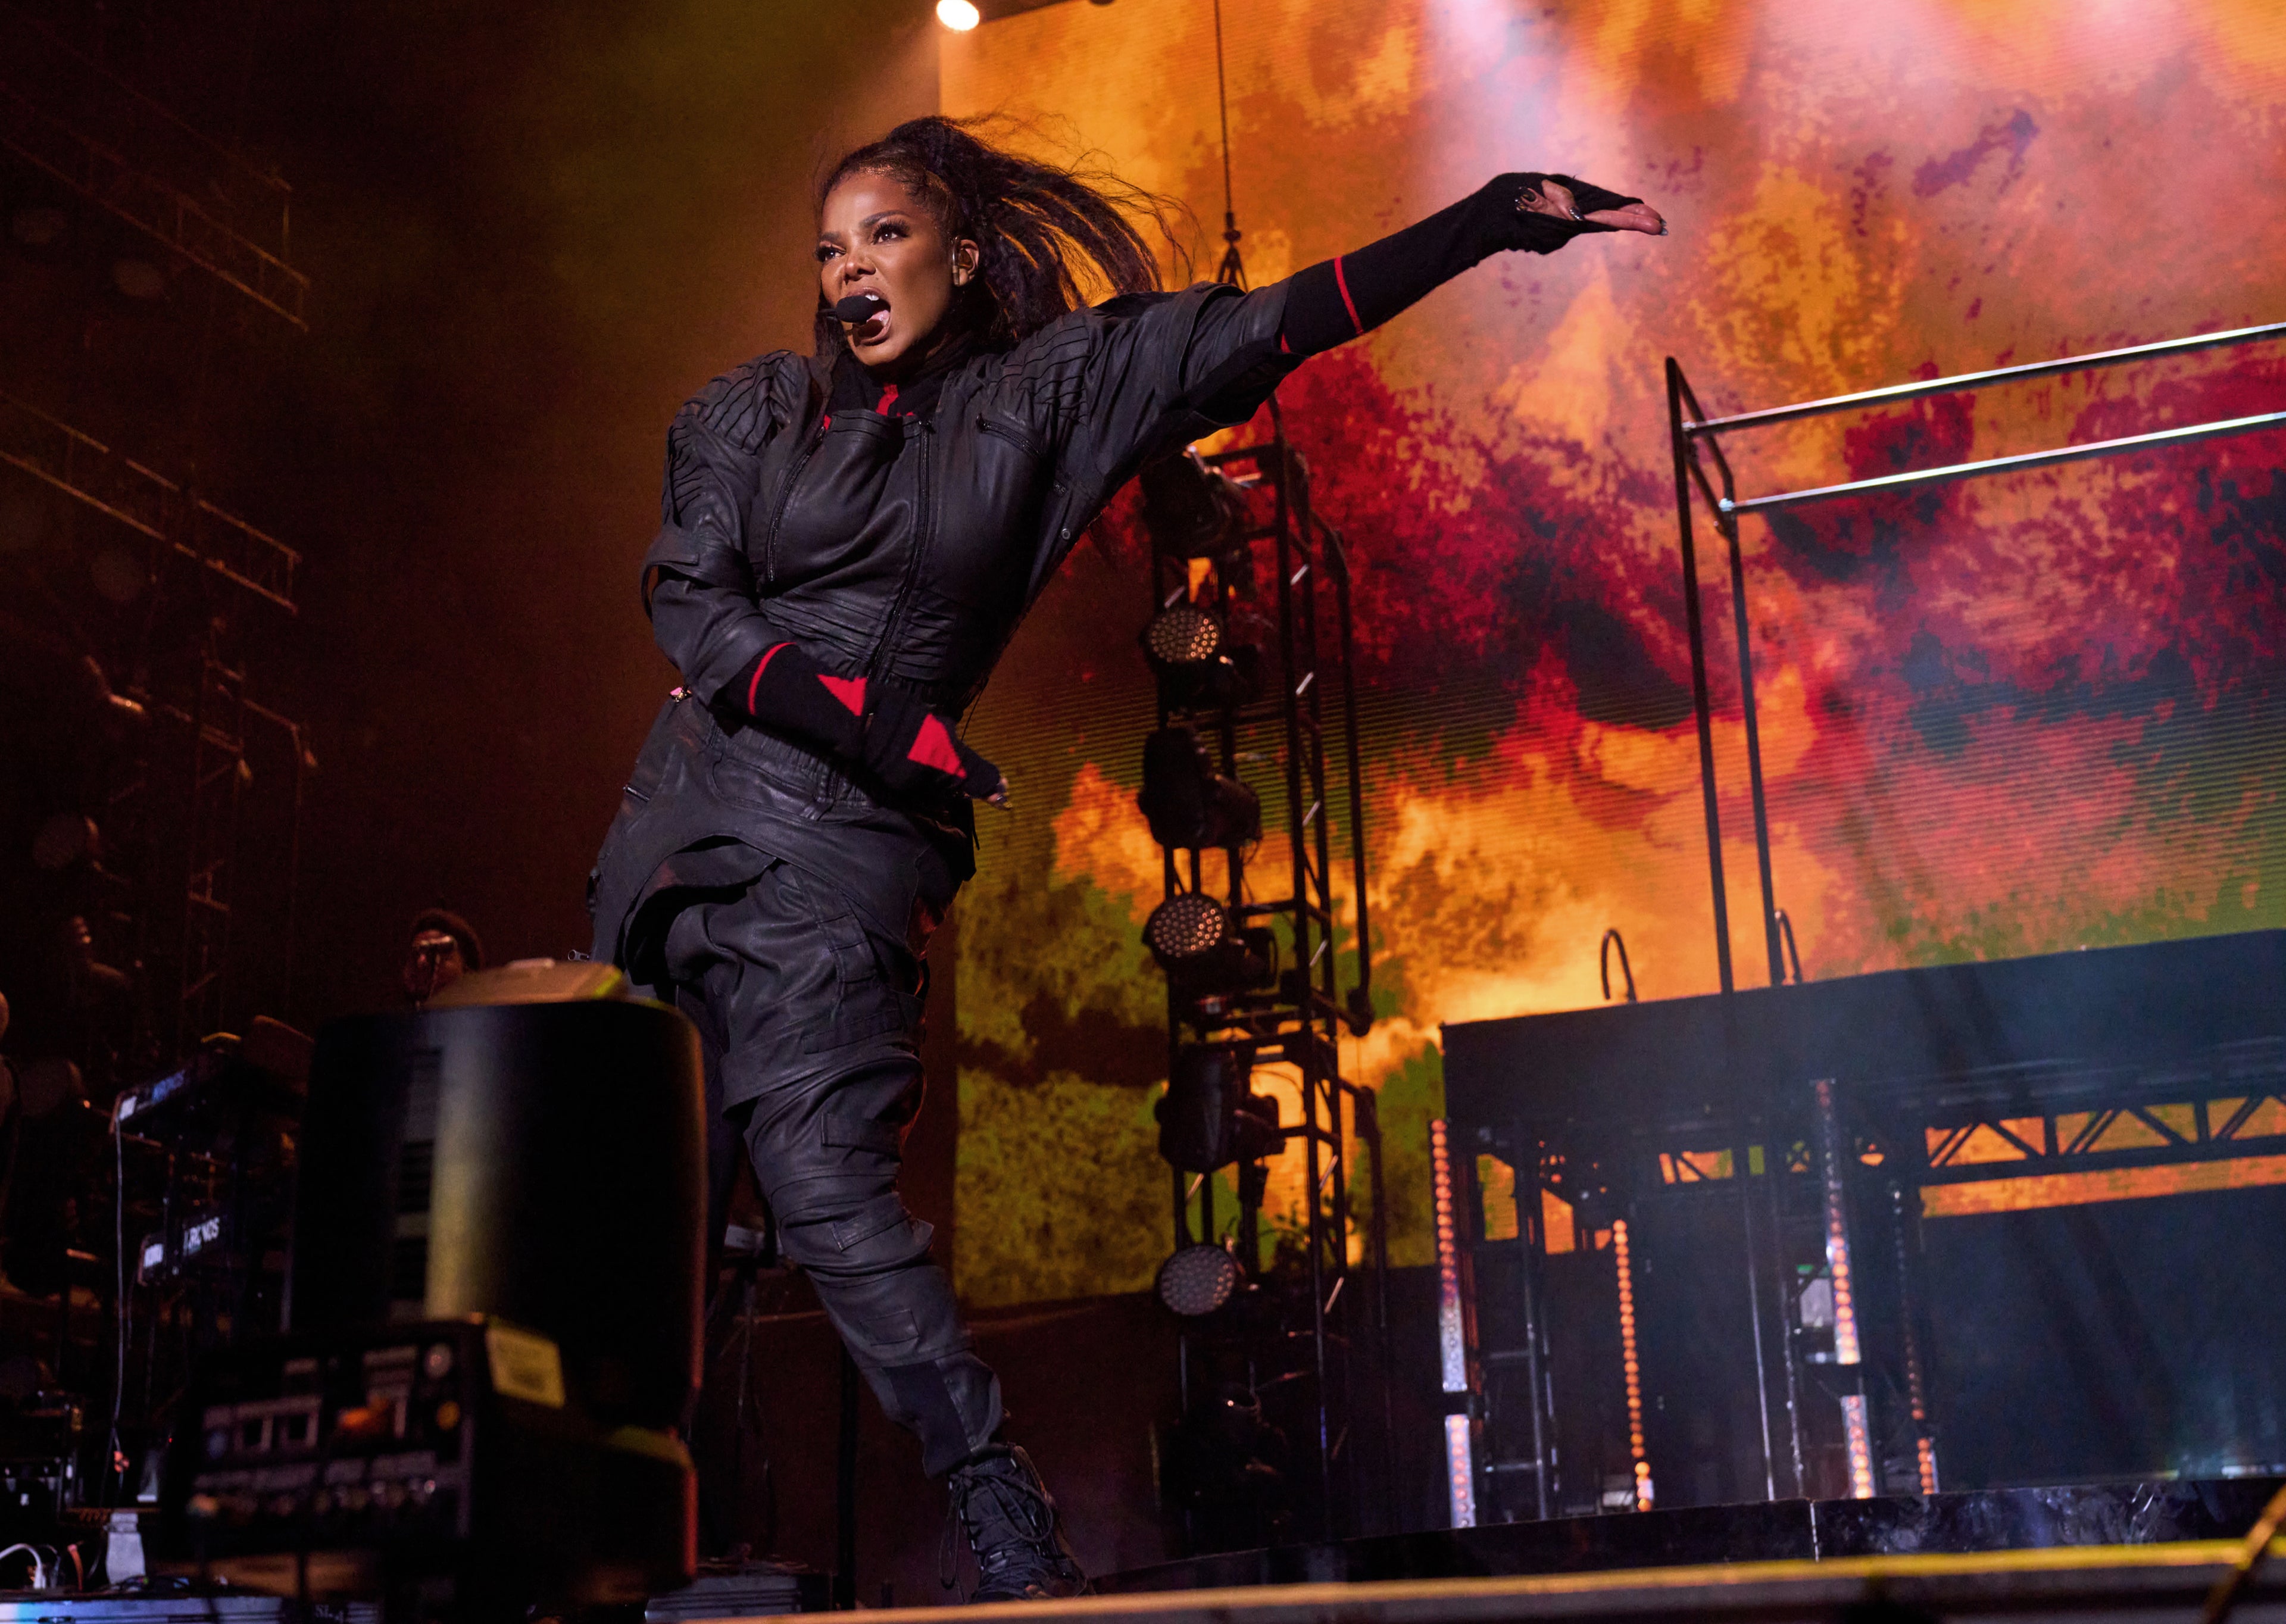 Janet Jackson and her dancers perform in DEMOBAZA at several live acts in Sacramento and Atlanta USA